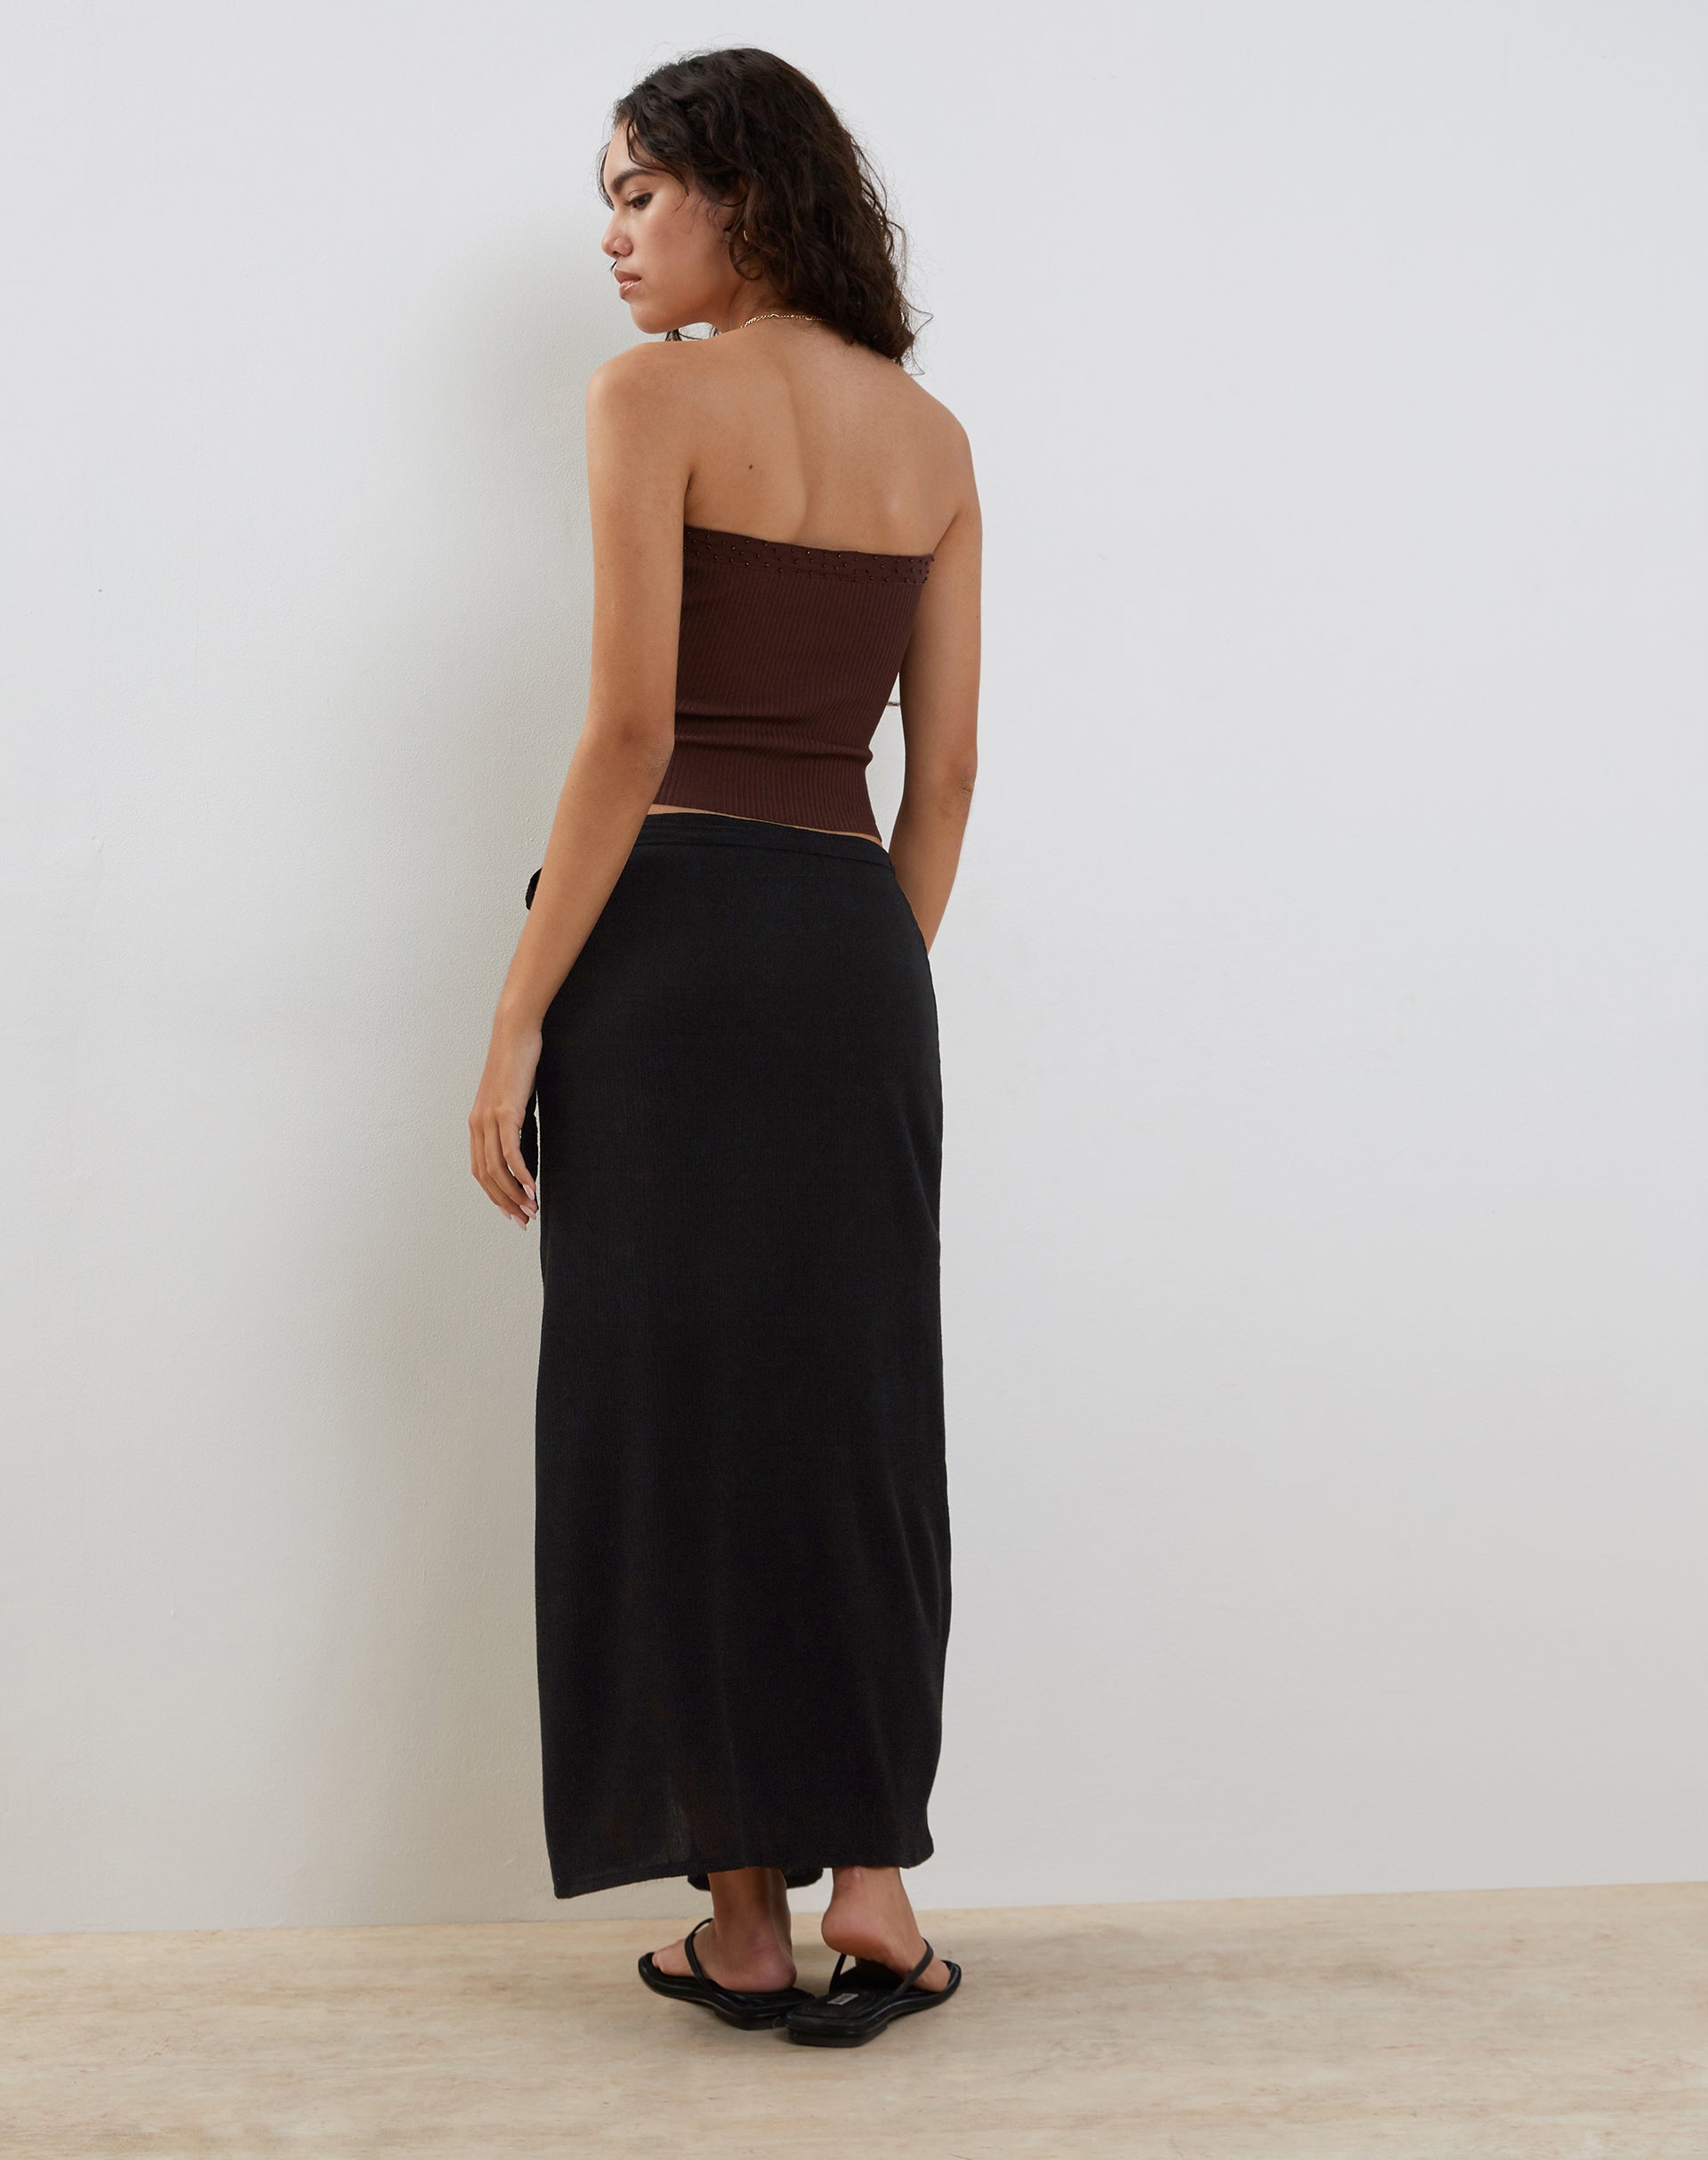 image of Peria Maxi Wrap Skirt in Black Crinkle